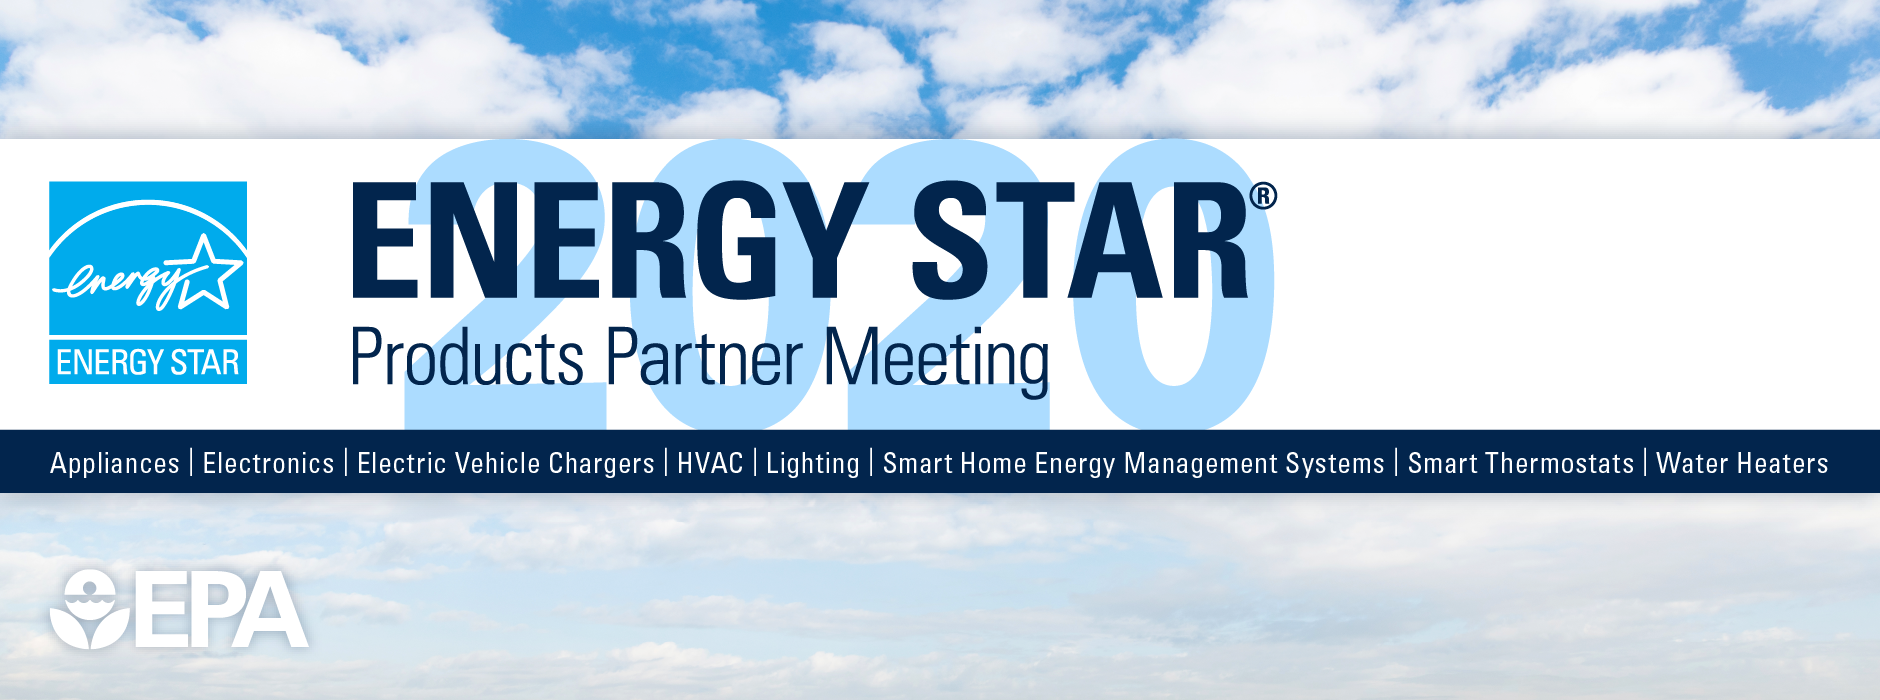 ENERGY STAR Products Partner Meeting banner